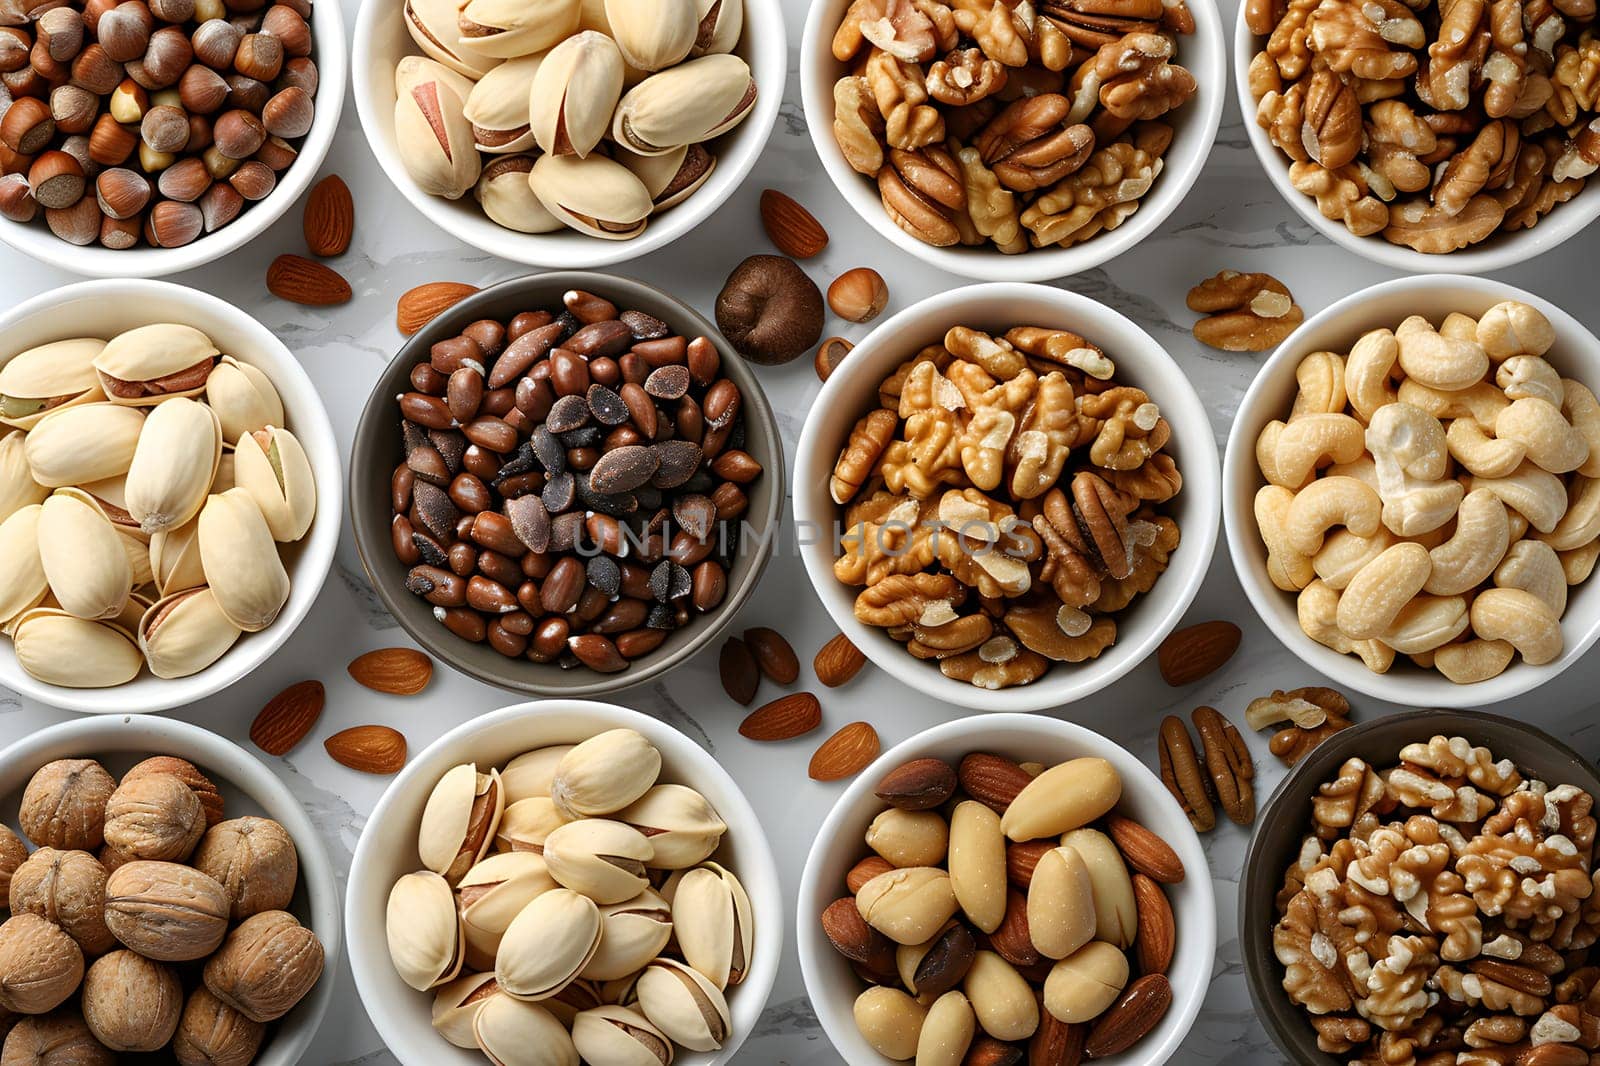 A selection of natural foods like almonds, walnuts, and cashews are displayed in bowls on a table. These nuts can be used as ingredients in various recipes and are considered superfoods